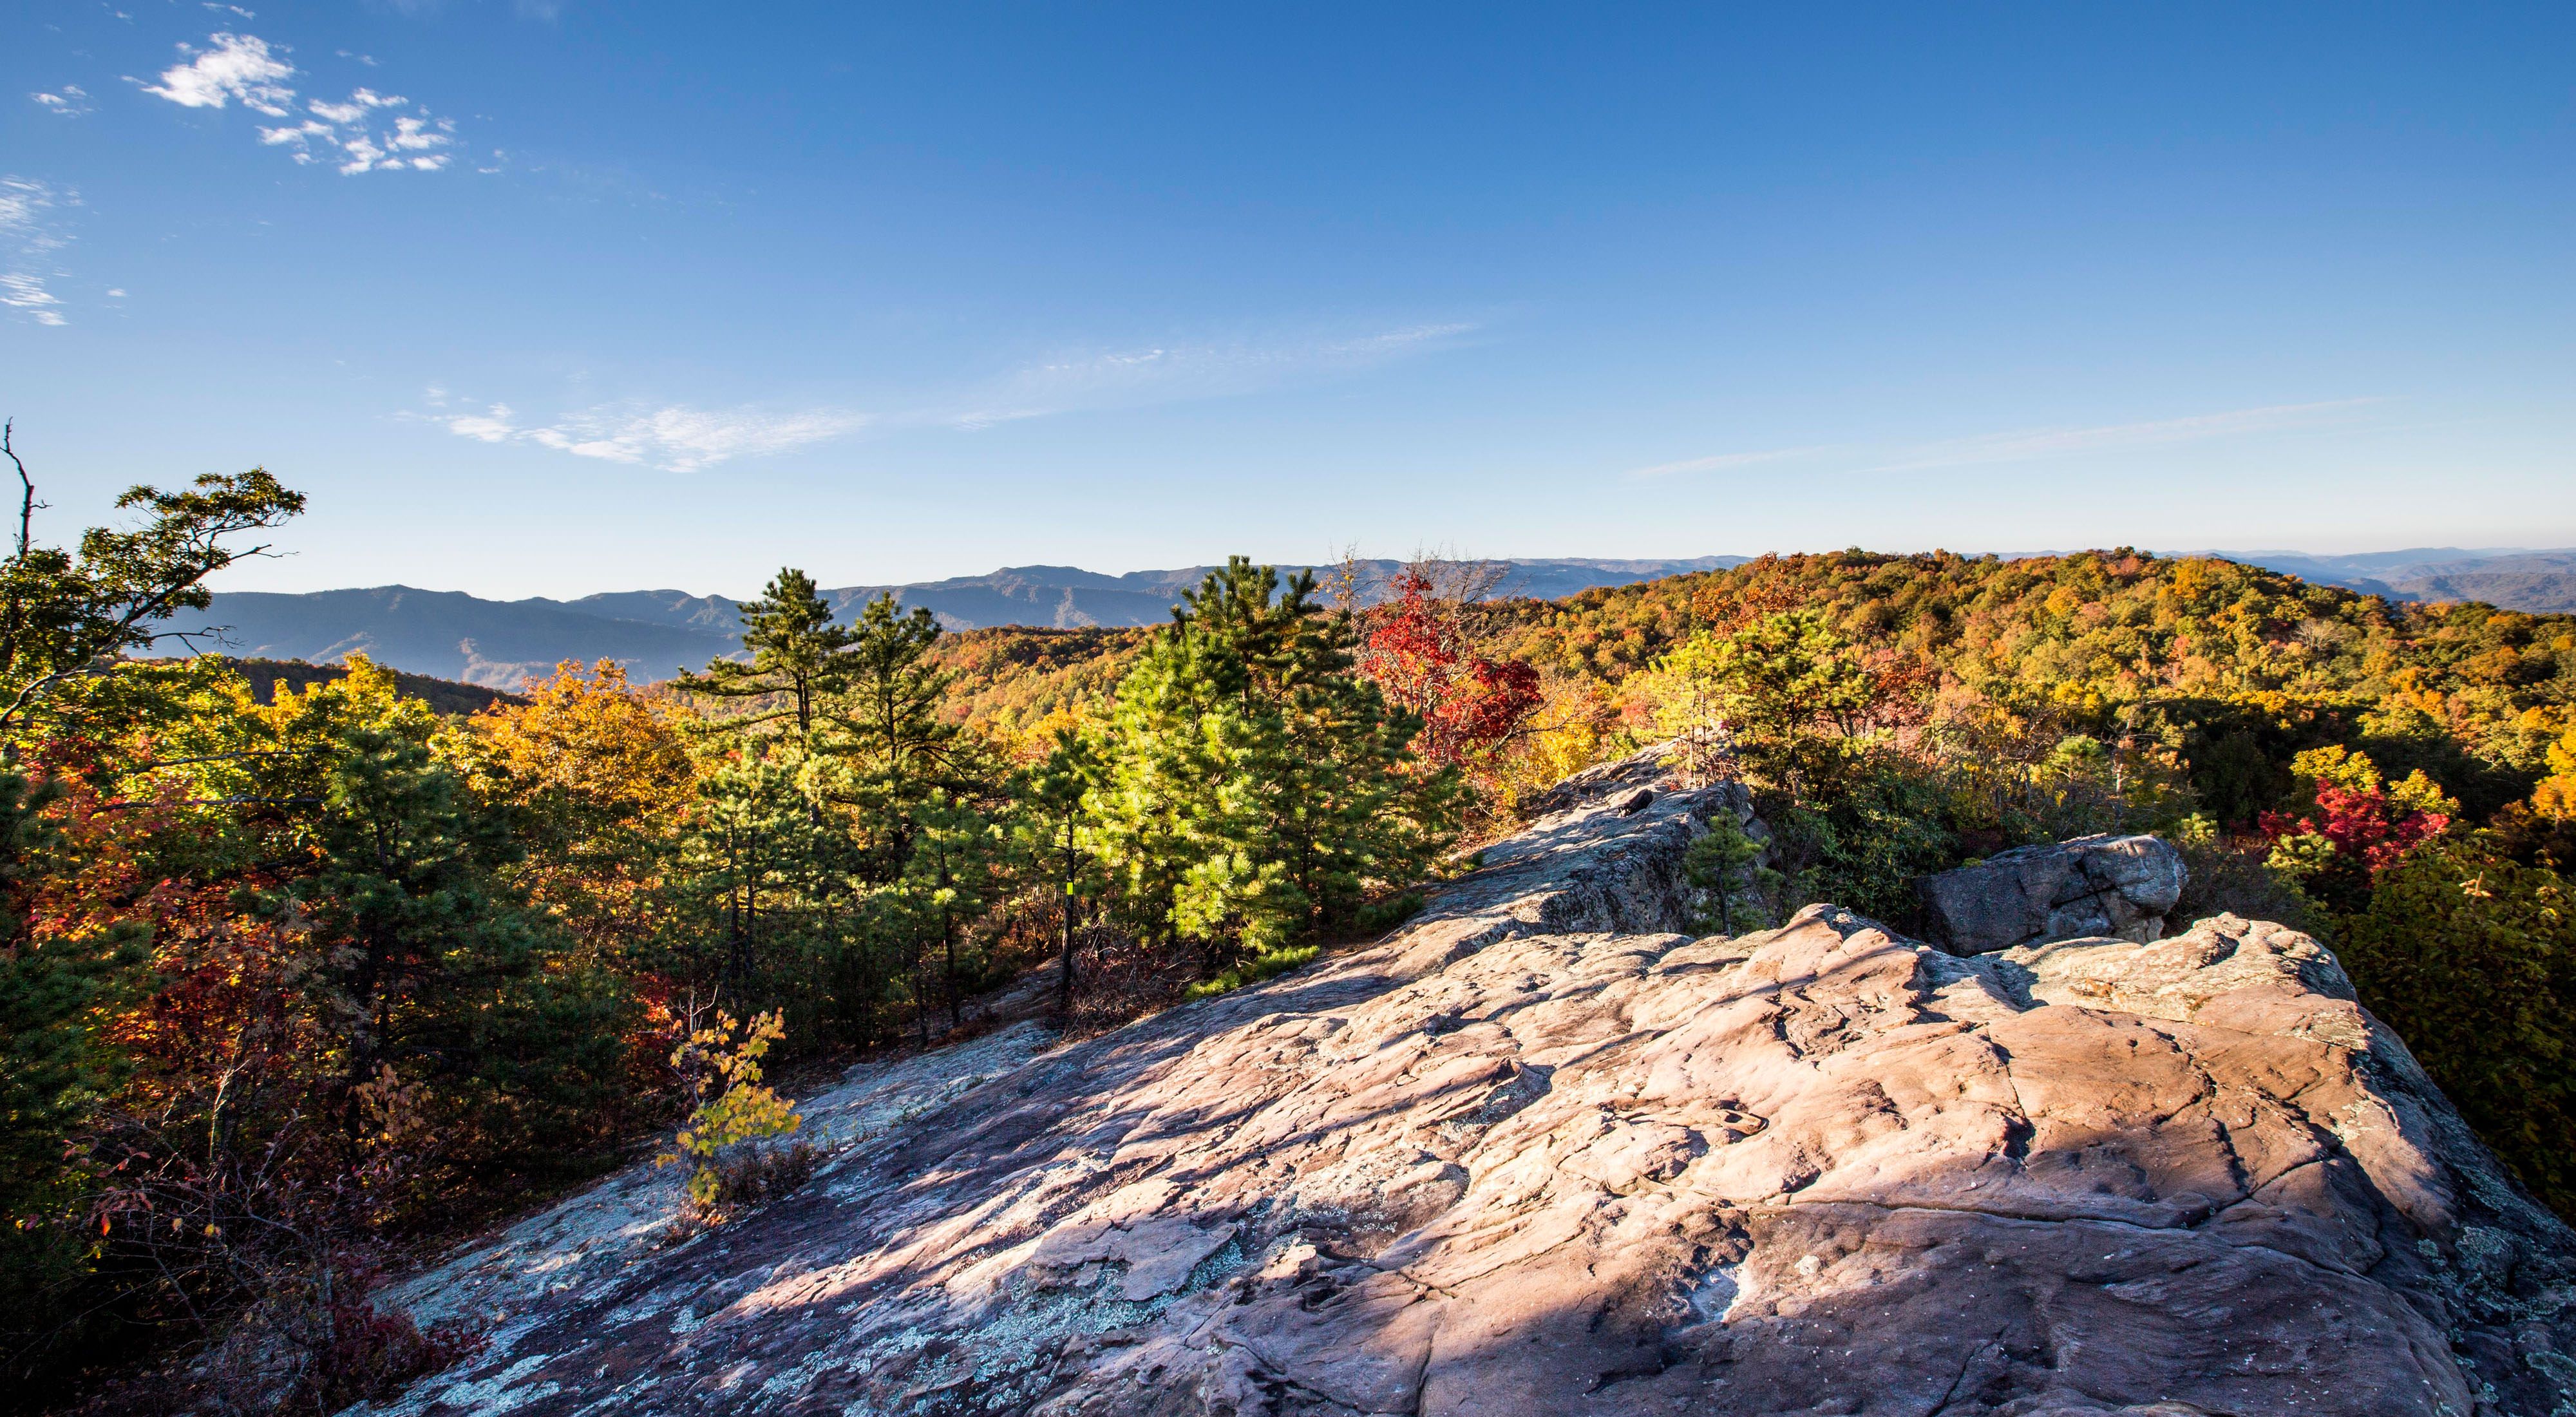 Mountaintop view overlooking a wide expanse of mountain ranges covered in bold autumn colors.